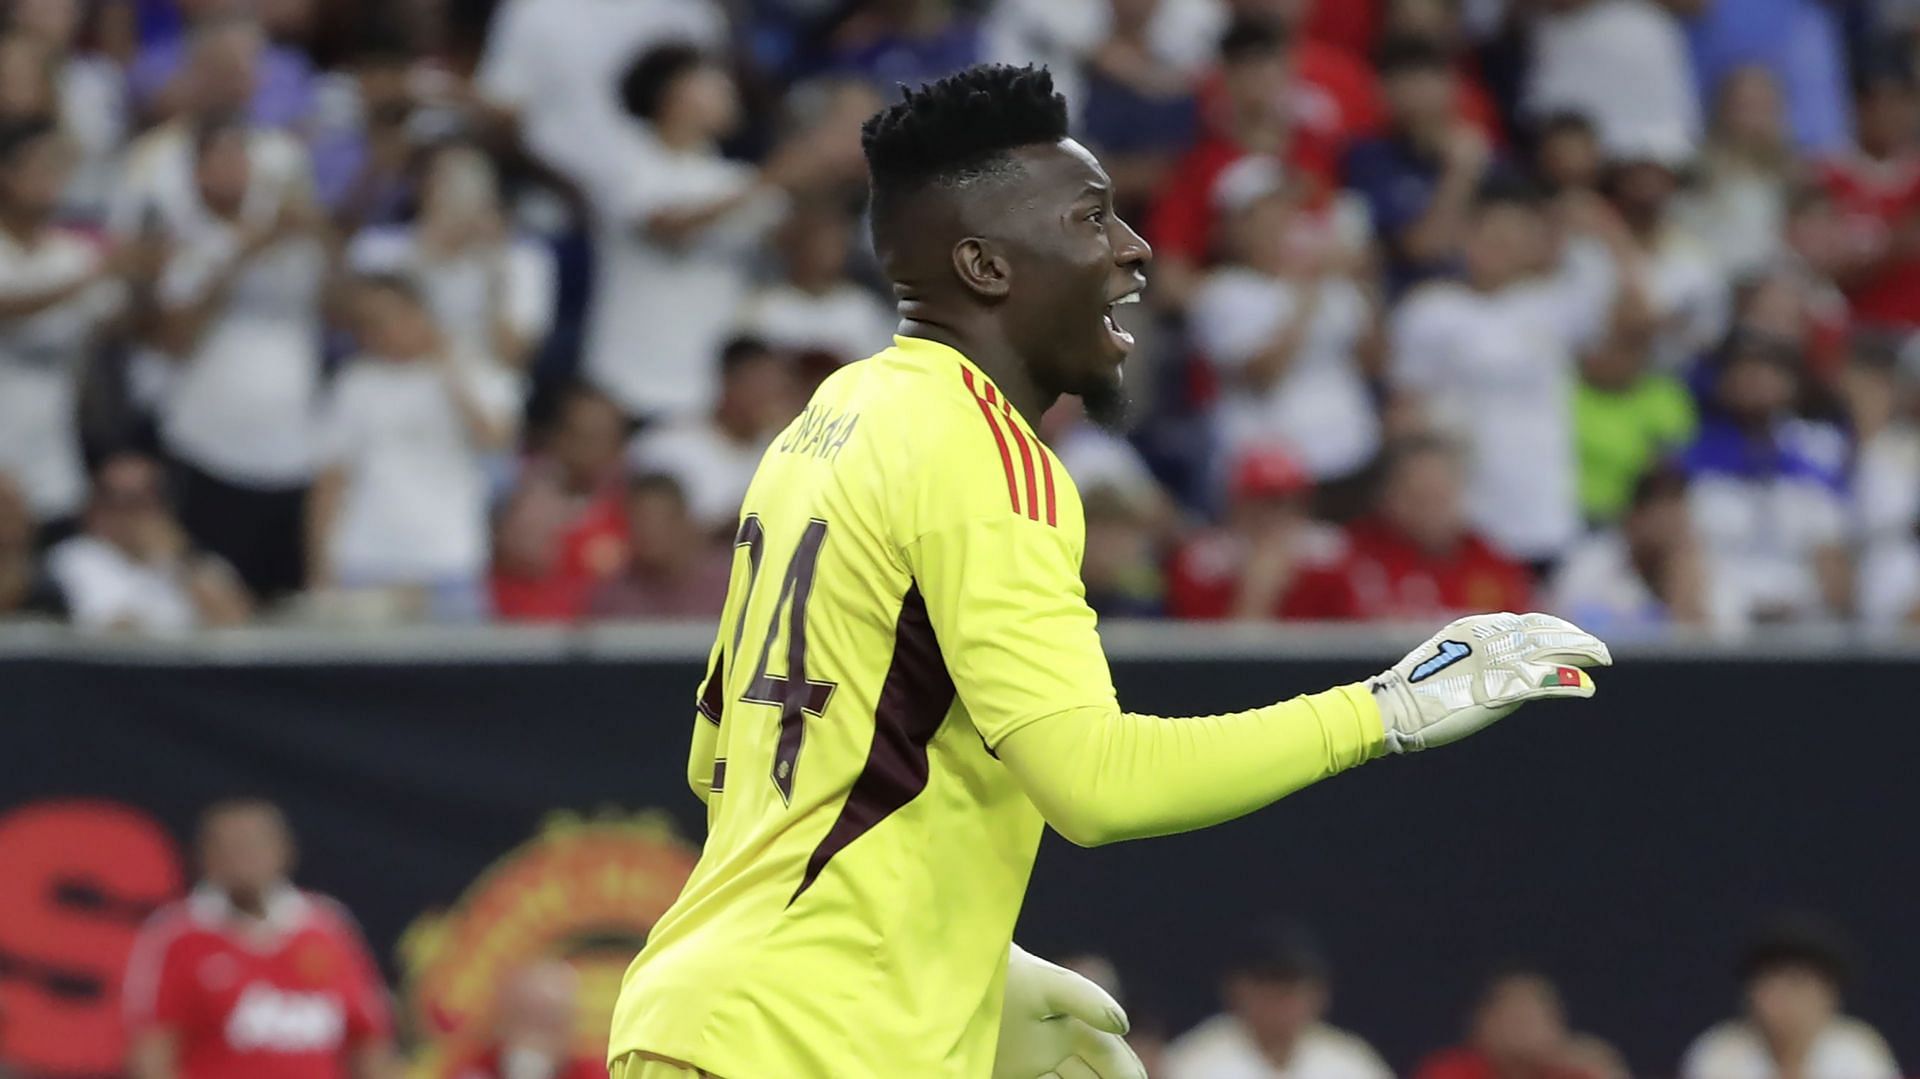 Andre Onana moved to Old Trafford this summer.